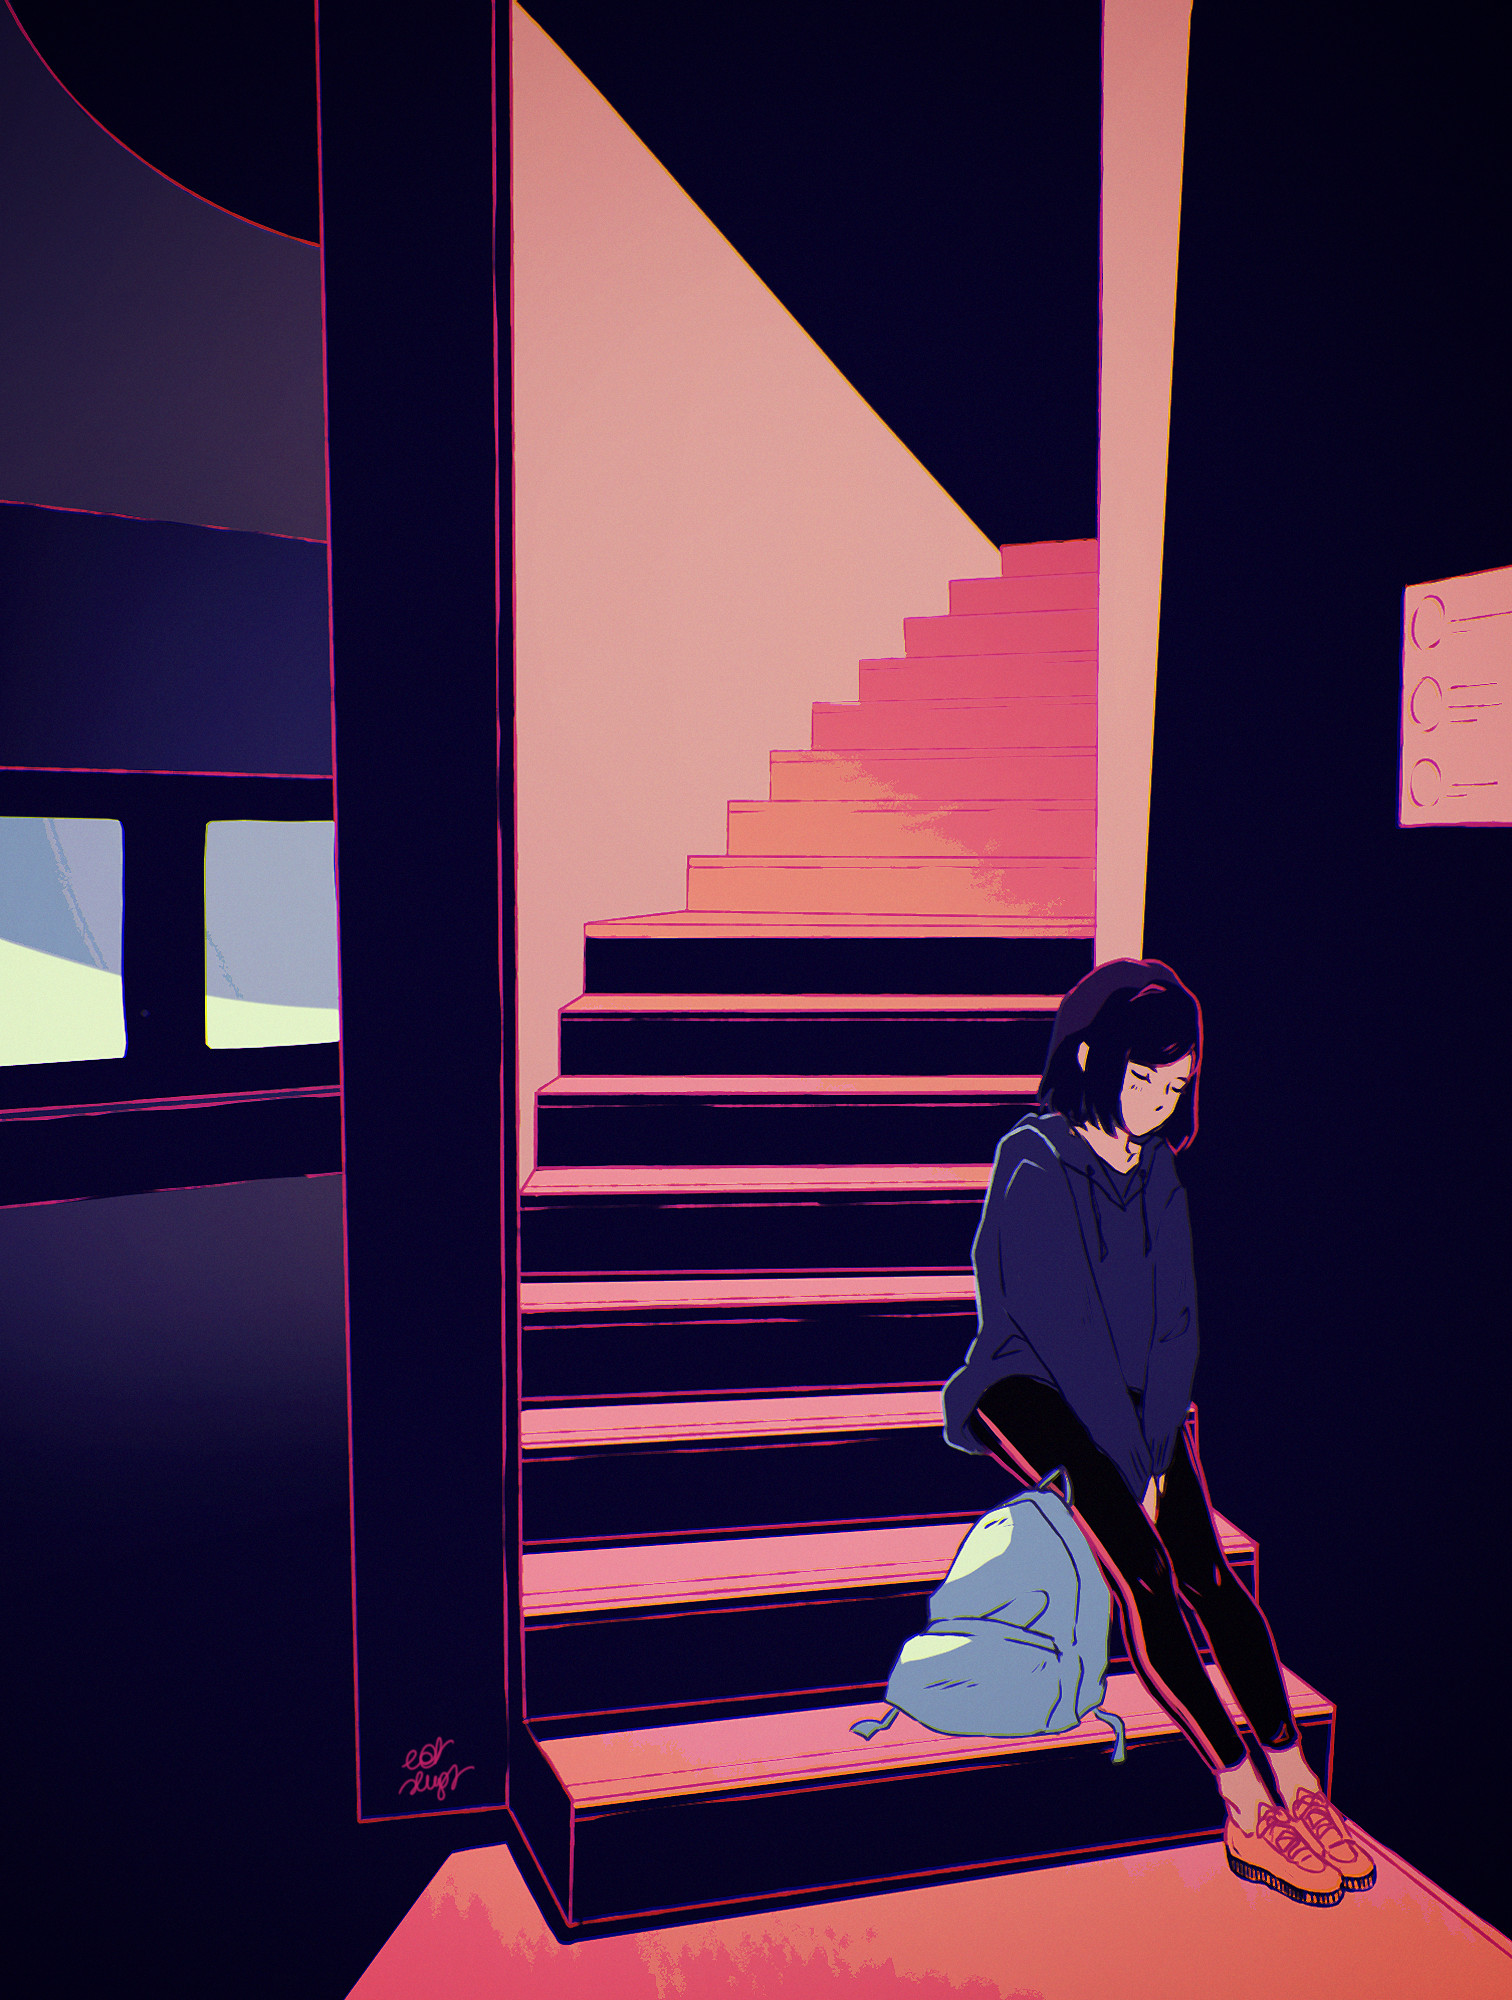 sadness, art, vector, girl, stairs, ladder, loneliness, sorrow